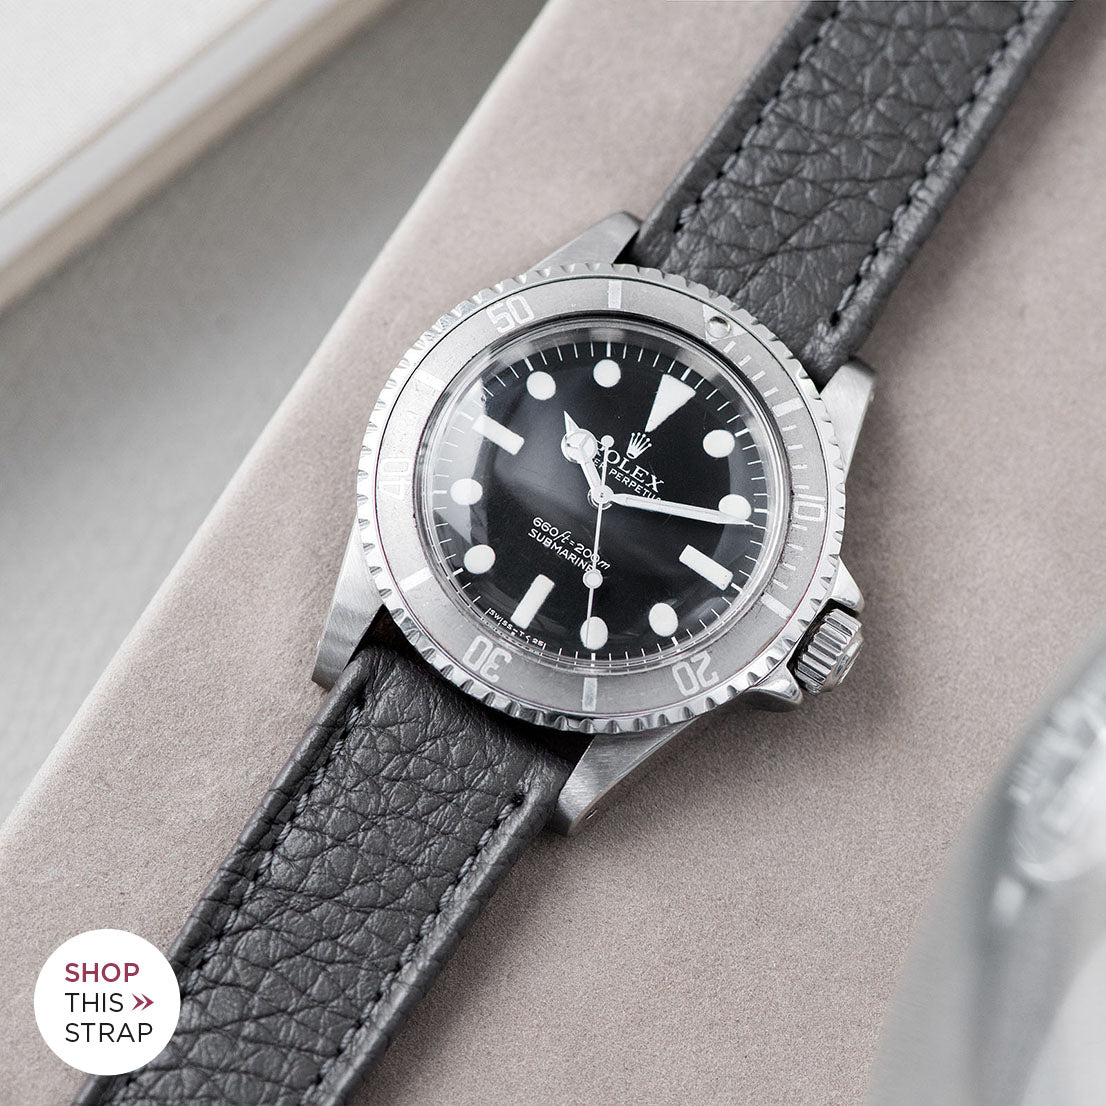 Bulang and Sons_Strap Guide_The Rolex 5513 Faded Maxi Submariner_Taurillon Grey Heritage Leather Watch Strap